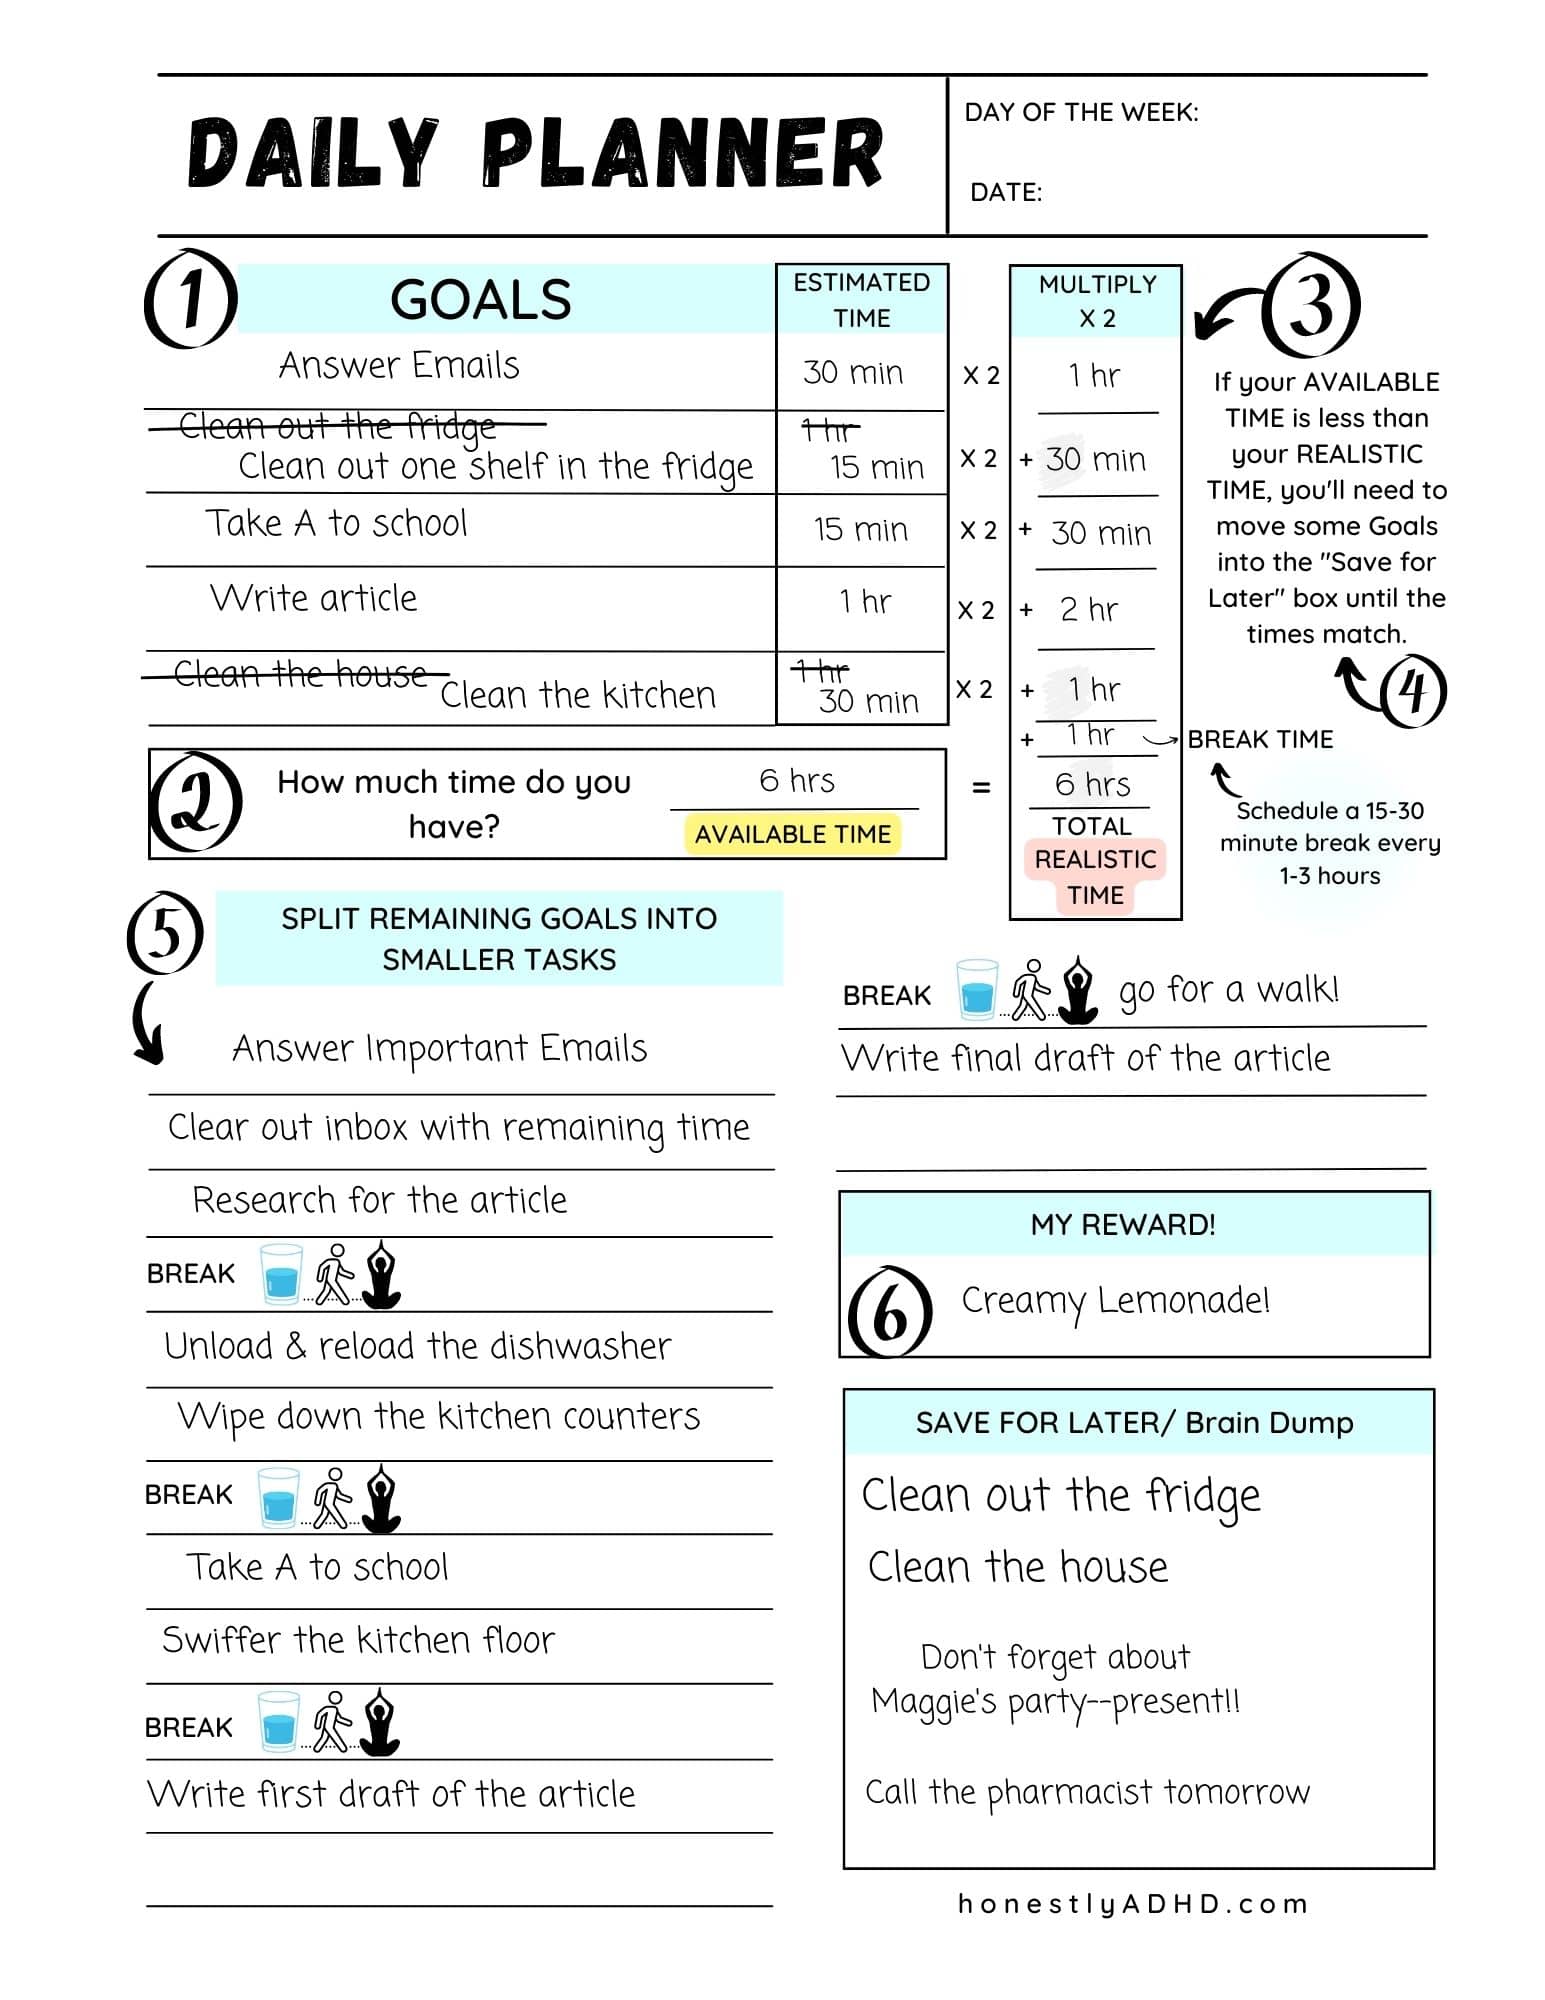 An image of the free printable daily planner with example writing filling out the sheet.